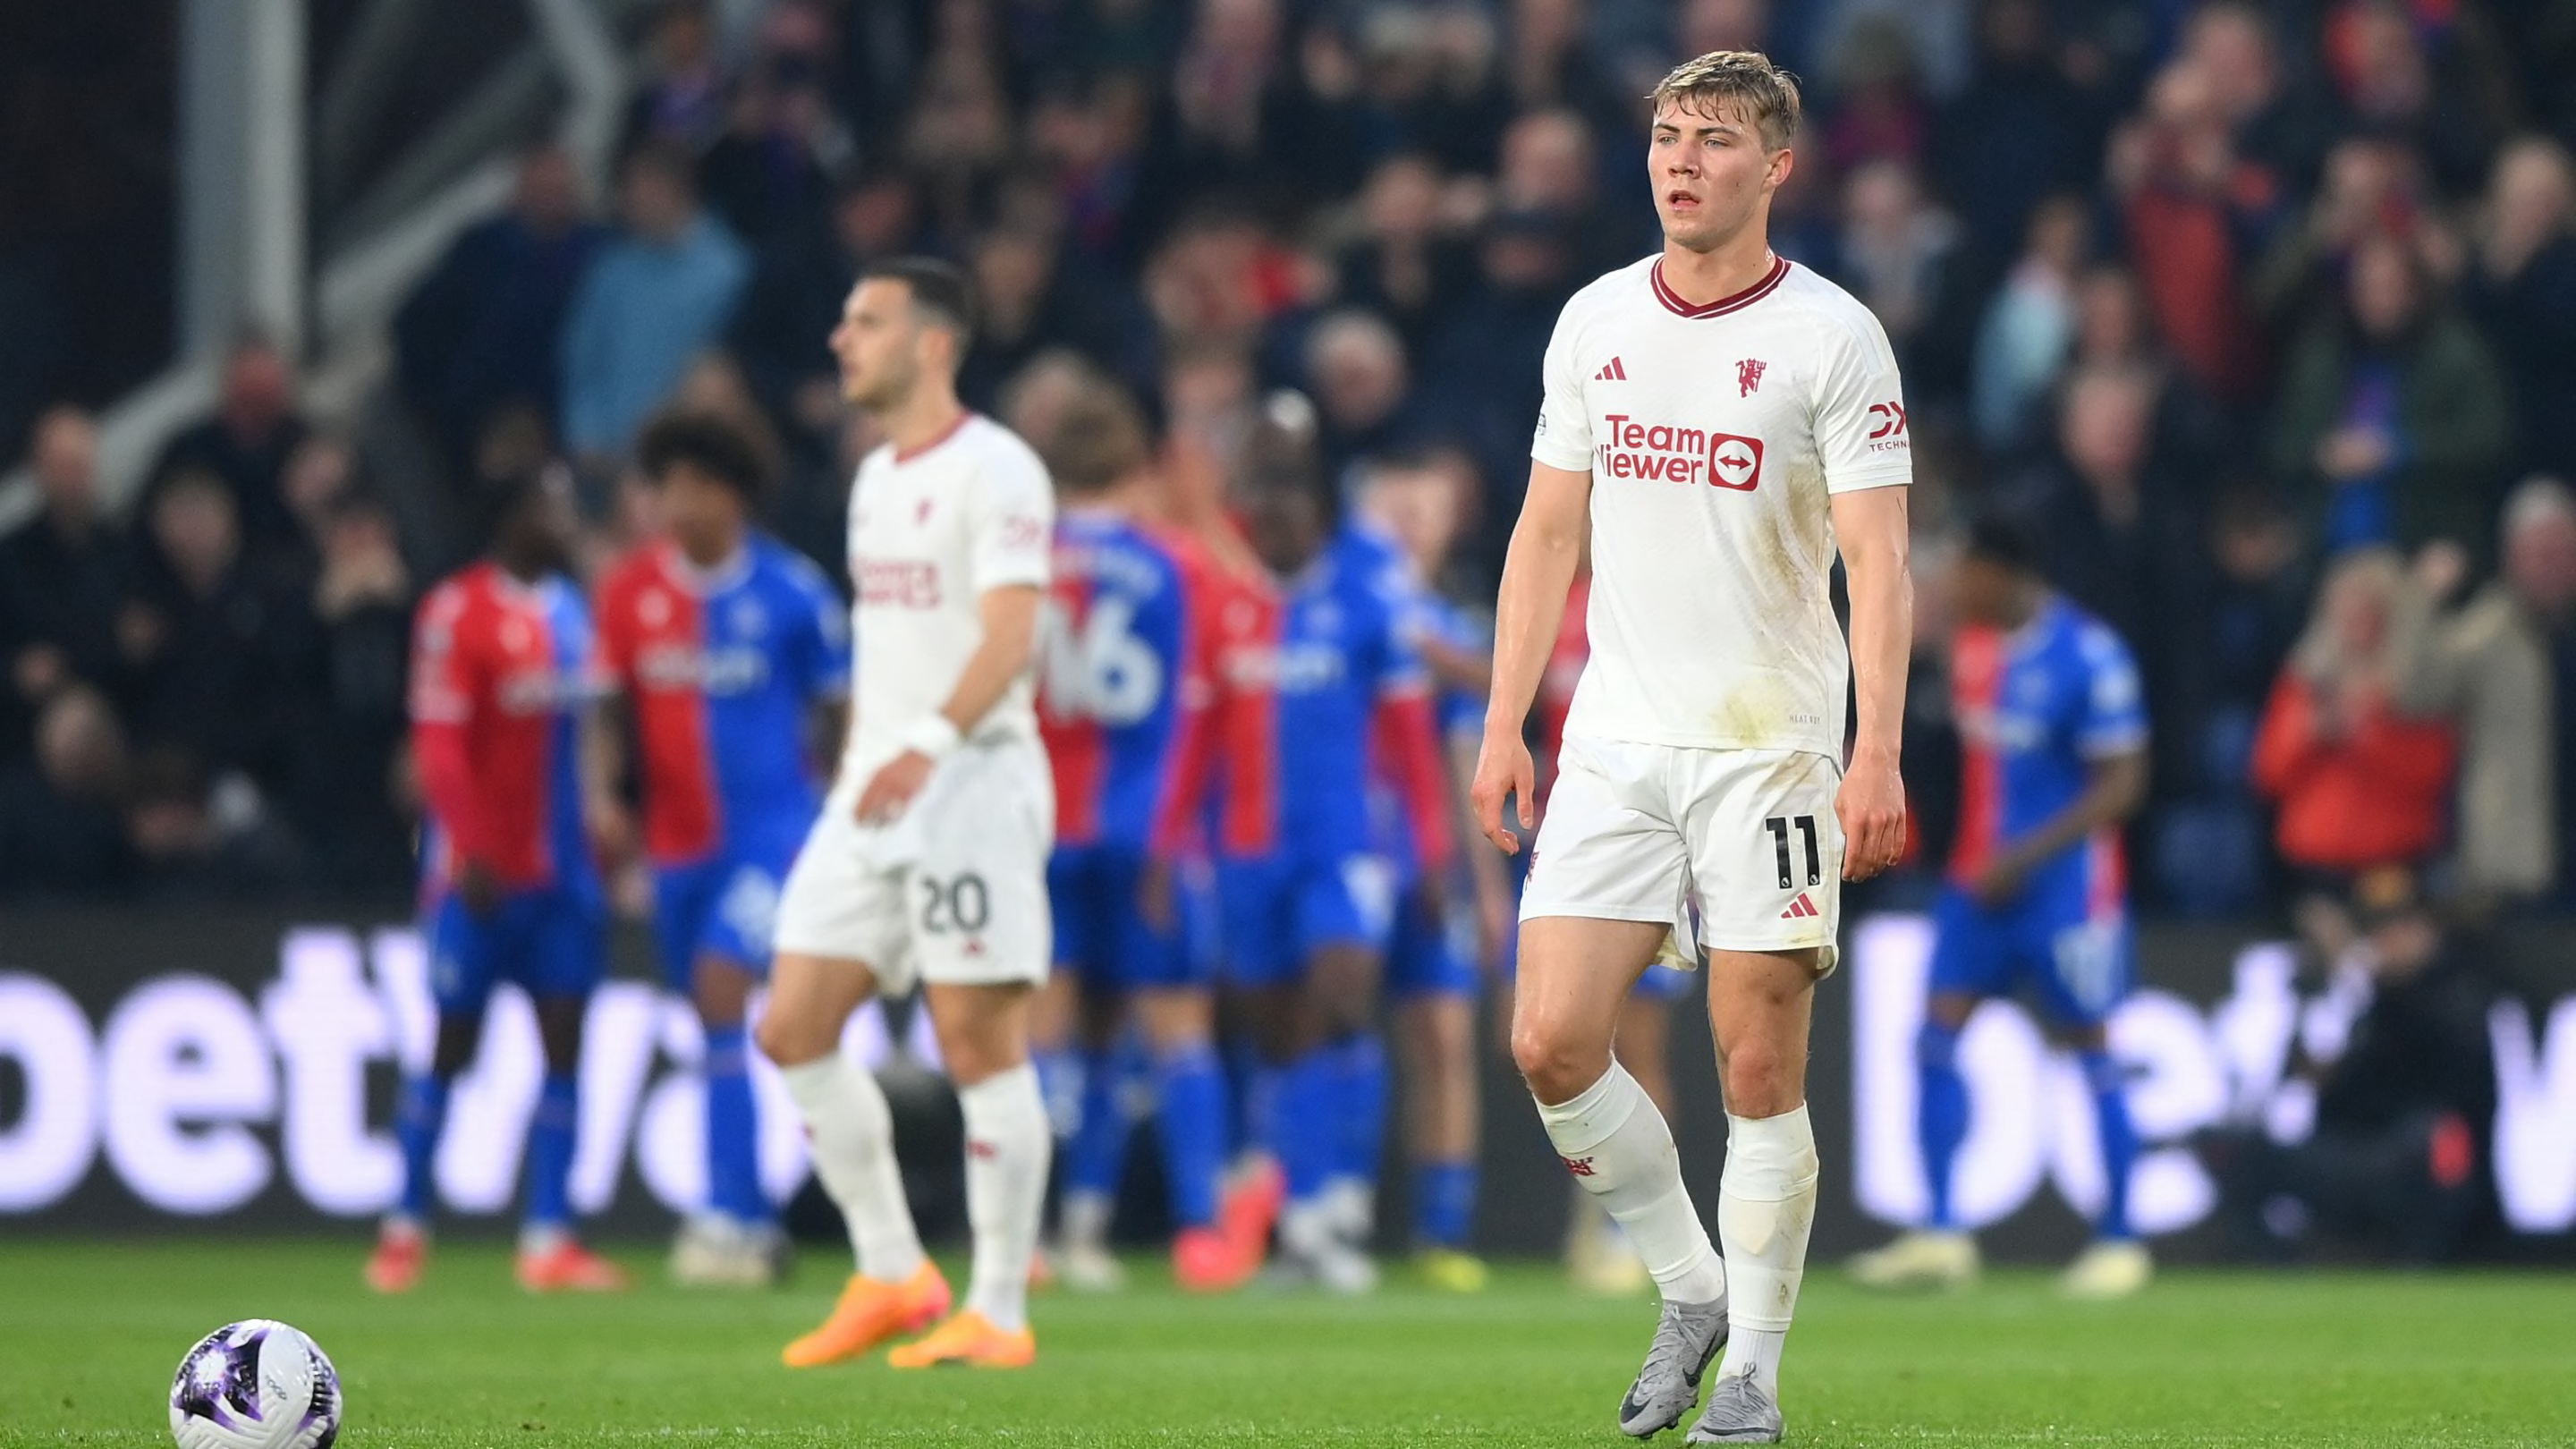 X reacts as injury-ravaged Man Utd slide to embarrassing defeat at Crystal Palace